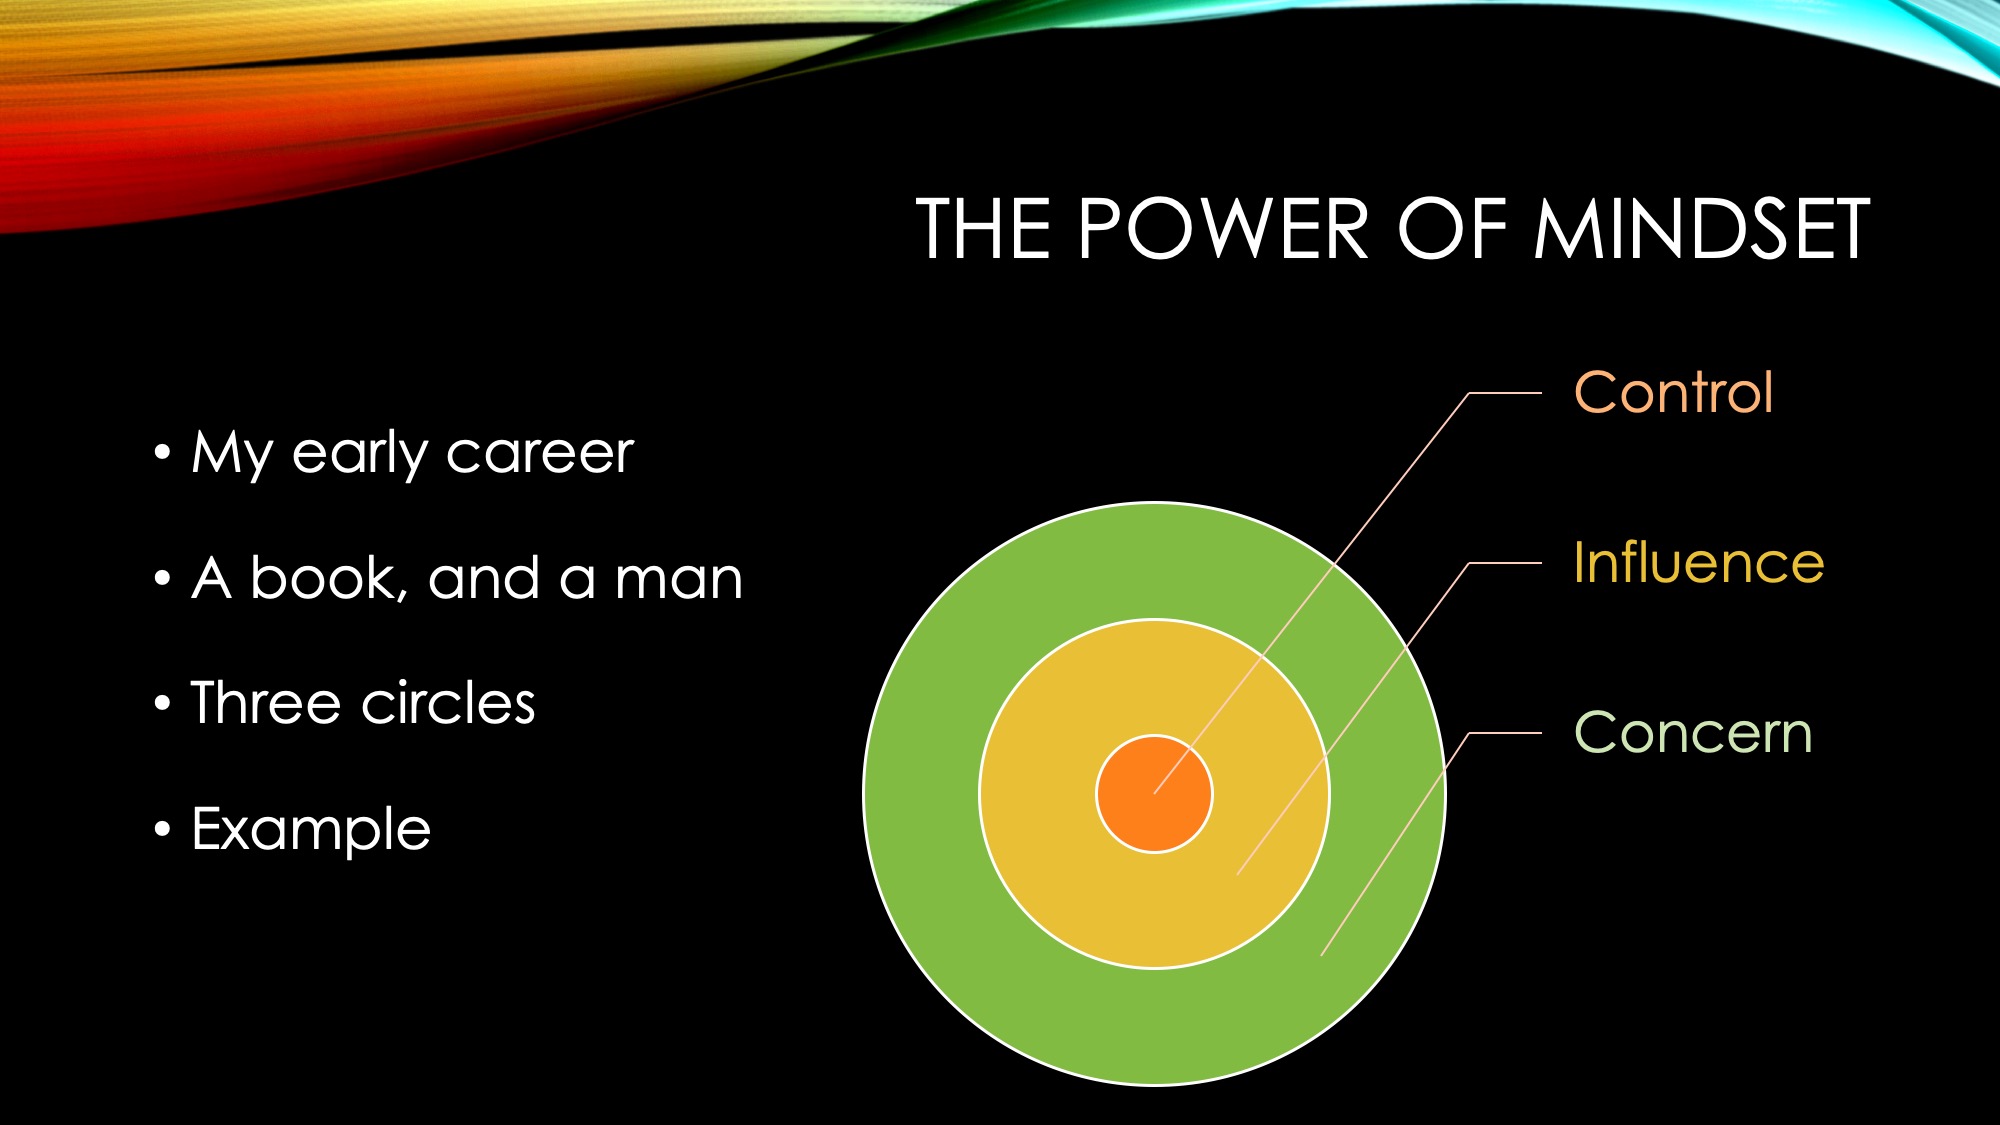 Figure 4: The power of mindset